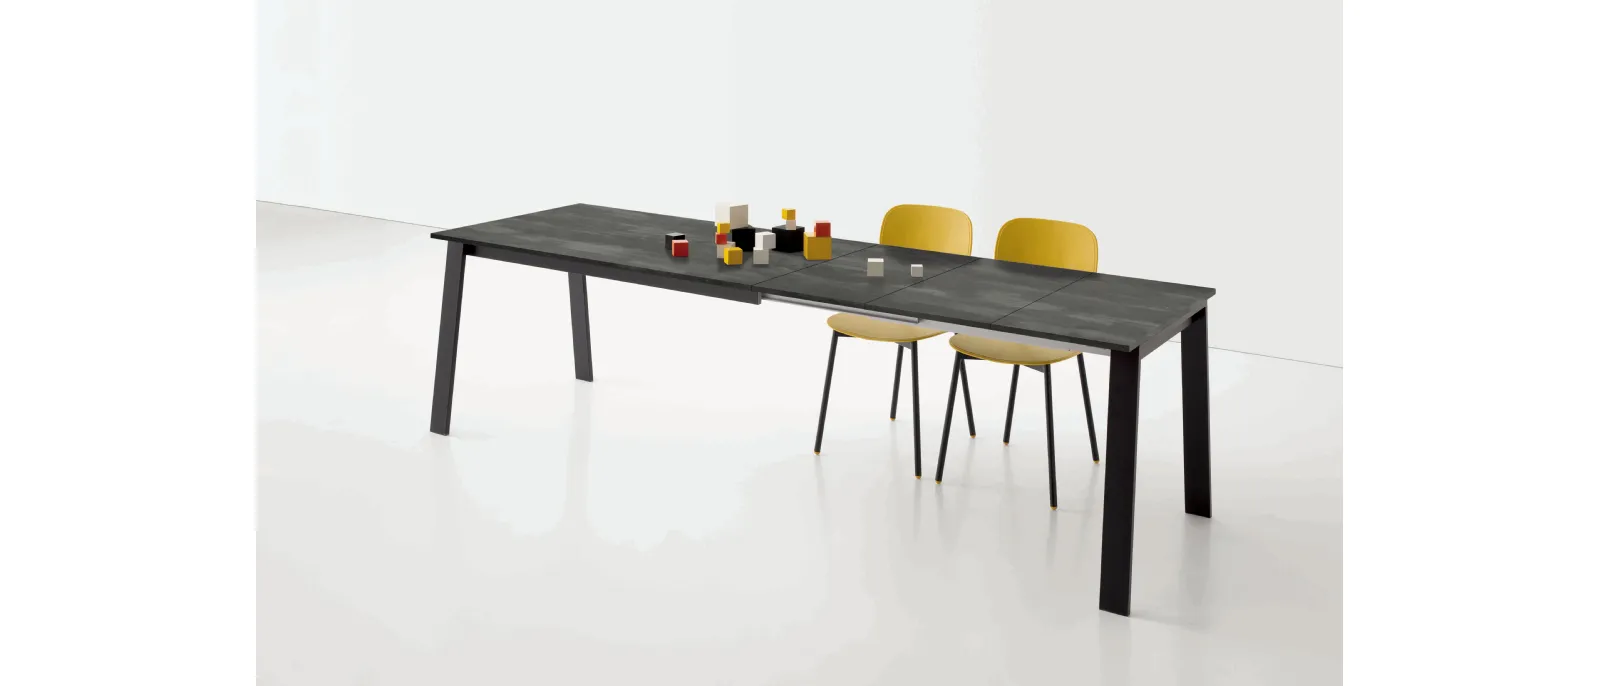 Delta table by Pointhouse